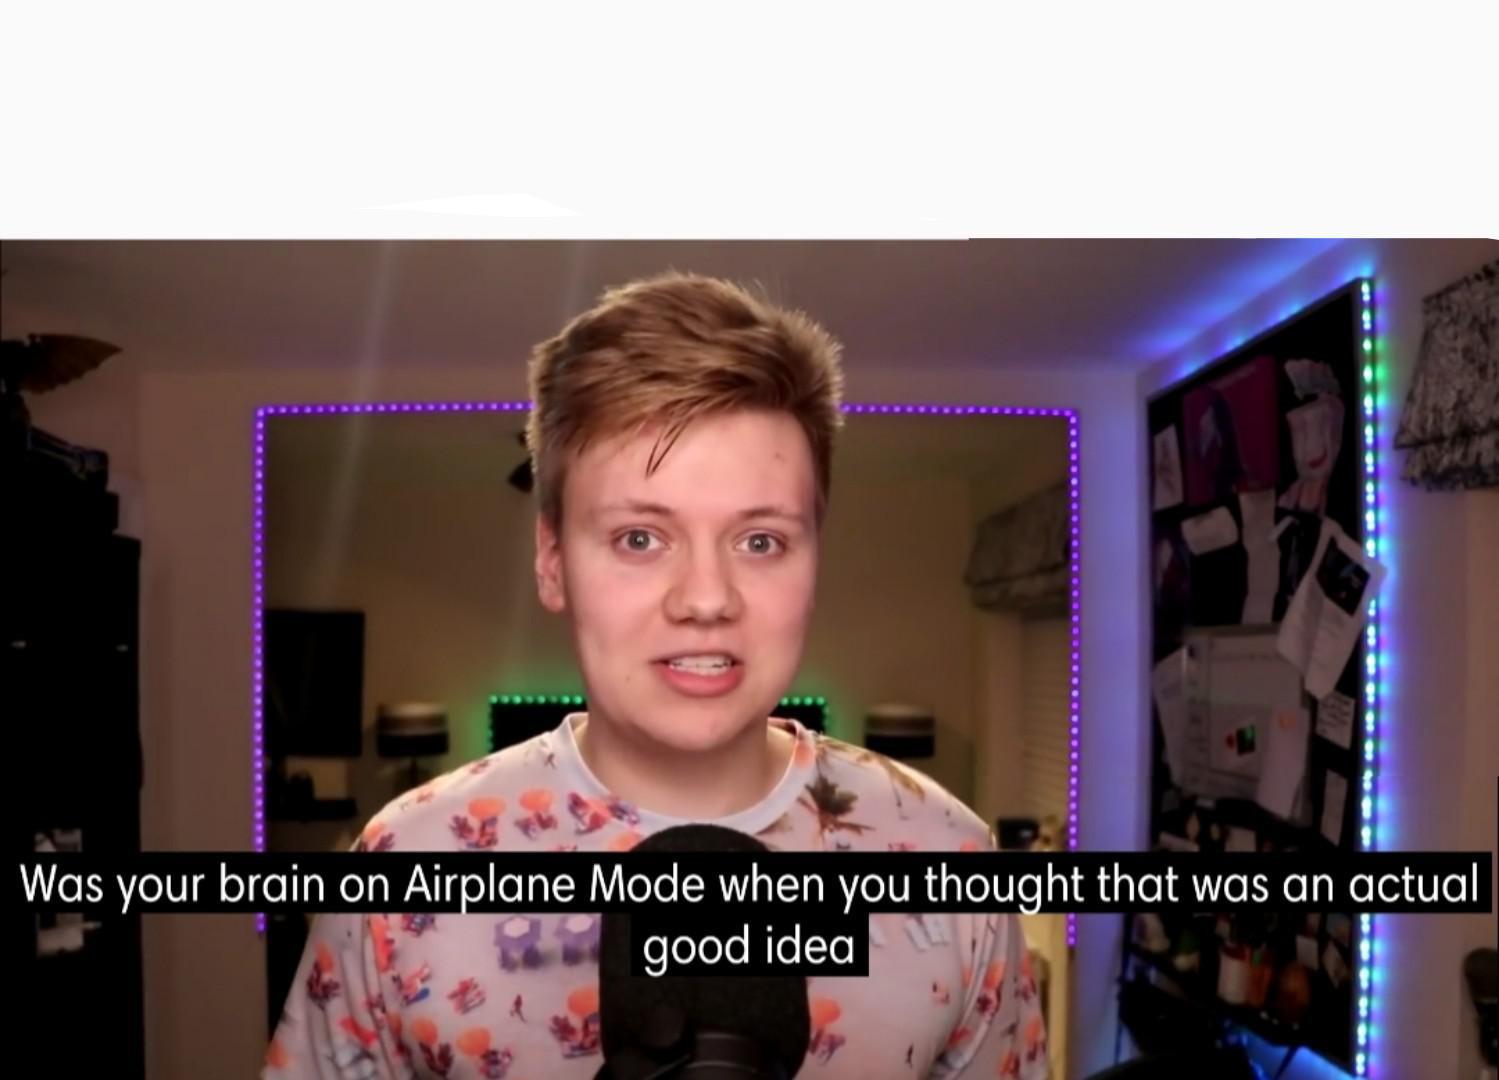 Was your brain on airplane mode? Blank Meme Template